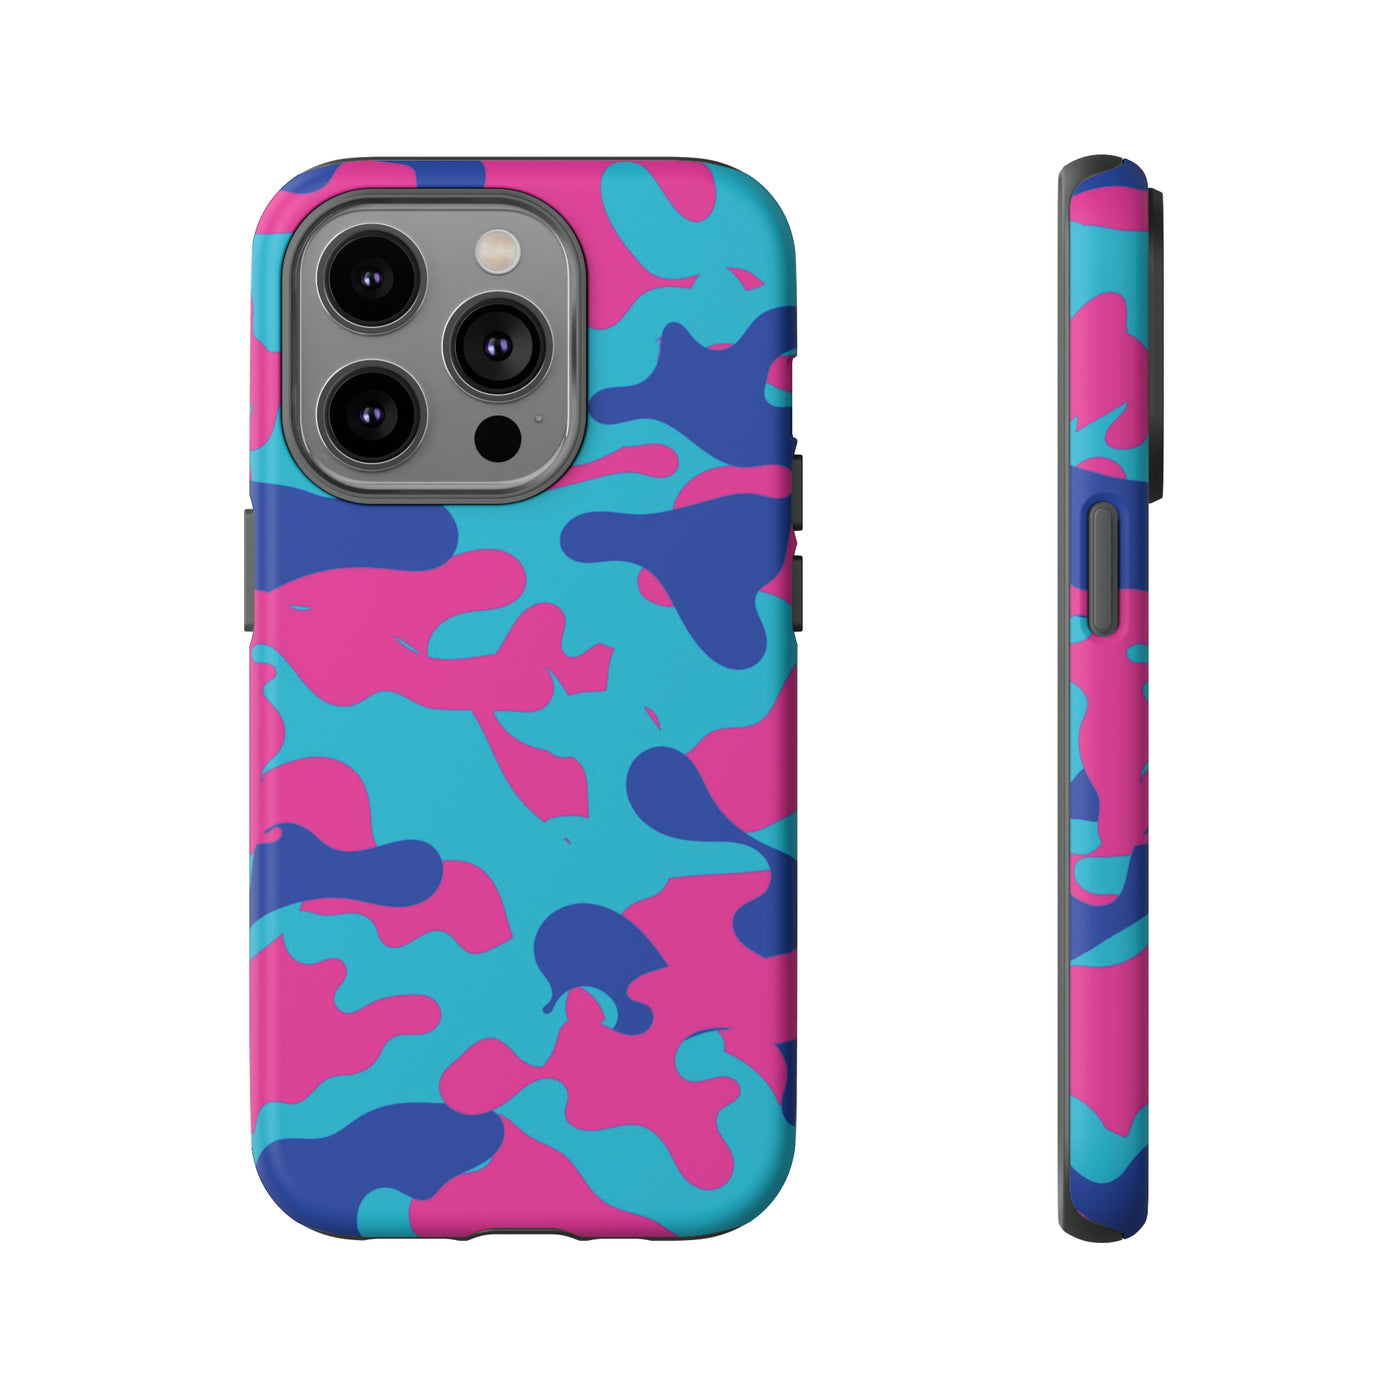 Cute IPhone Case | Blue Pink Camouflage, iPhone 15 Case | iPhone 15 Pro Case, Iphone 14 Case, Iphone 14 Pro Max Case, Protective Iphone Case